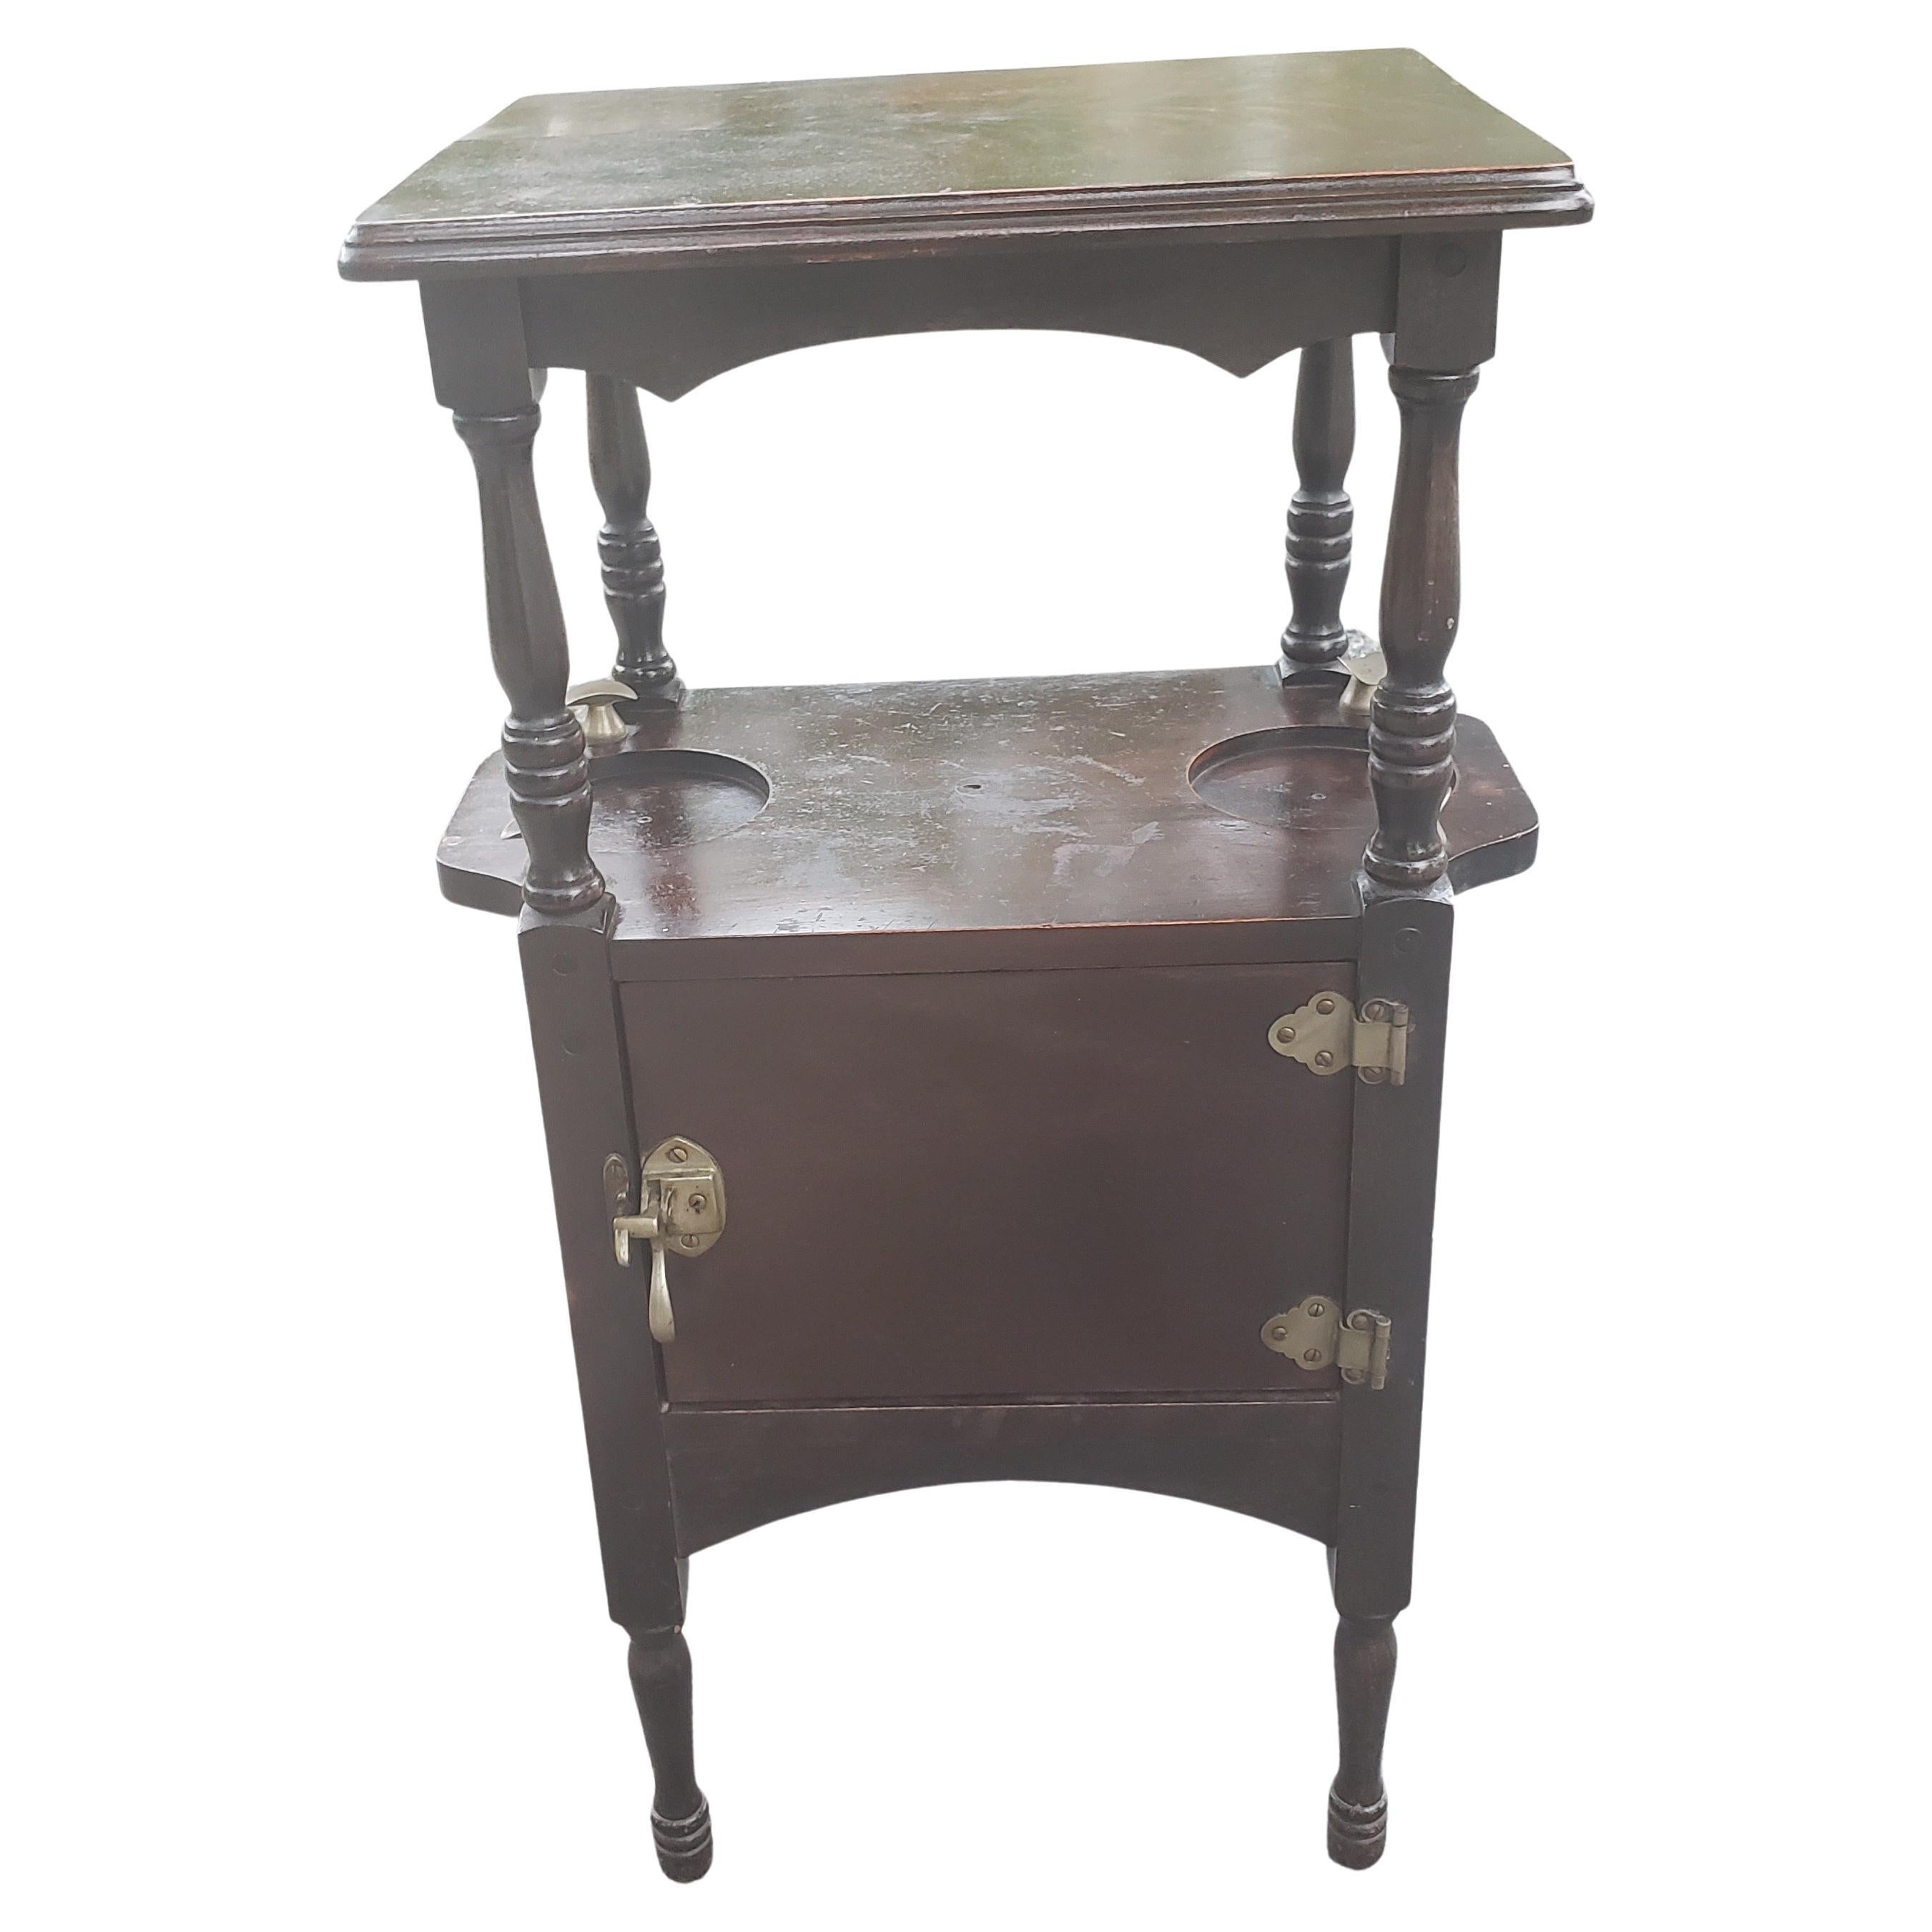 Hand-Crafted Antique H. T. Cushman Flame Mahogany Smoking Table Stand, circa 1890s For Sale